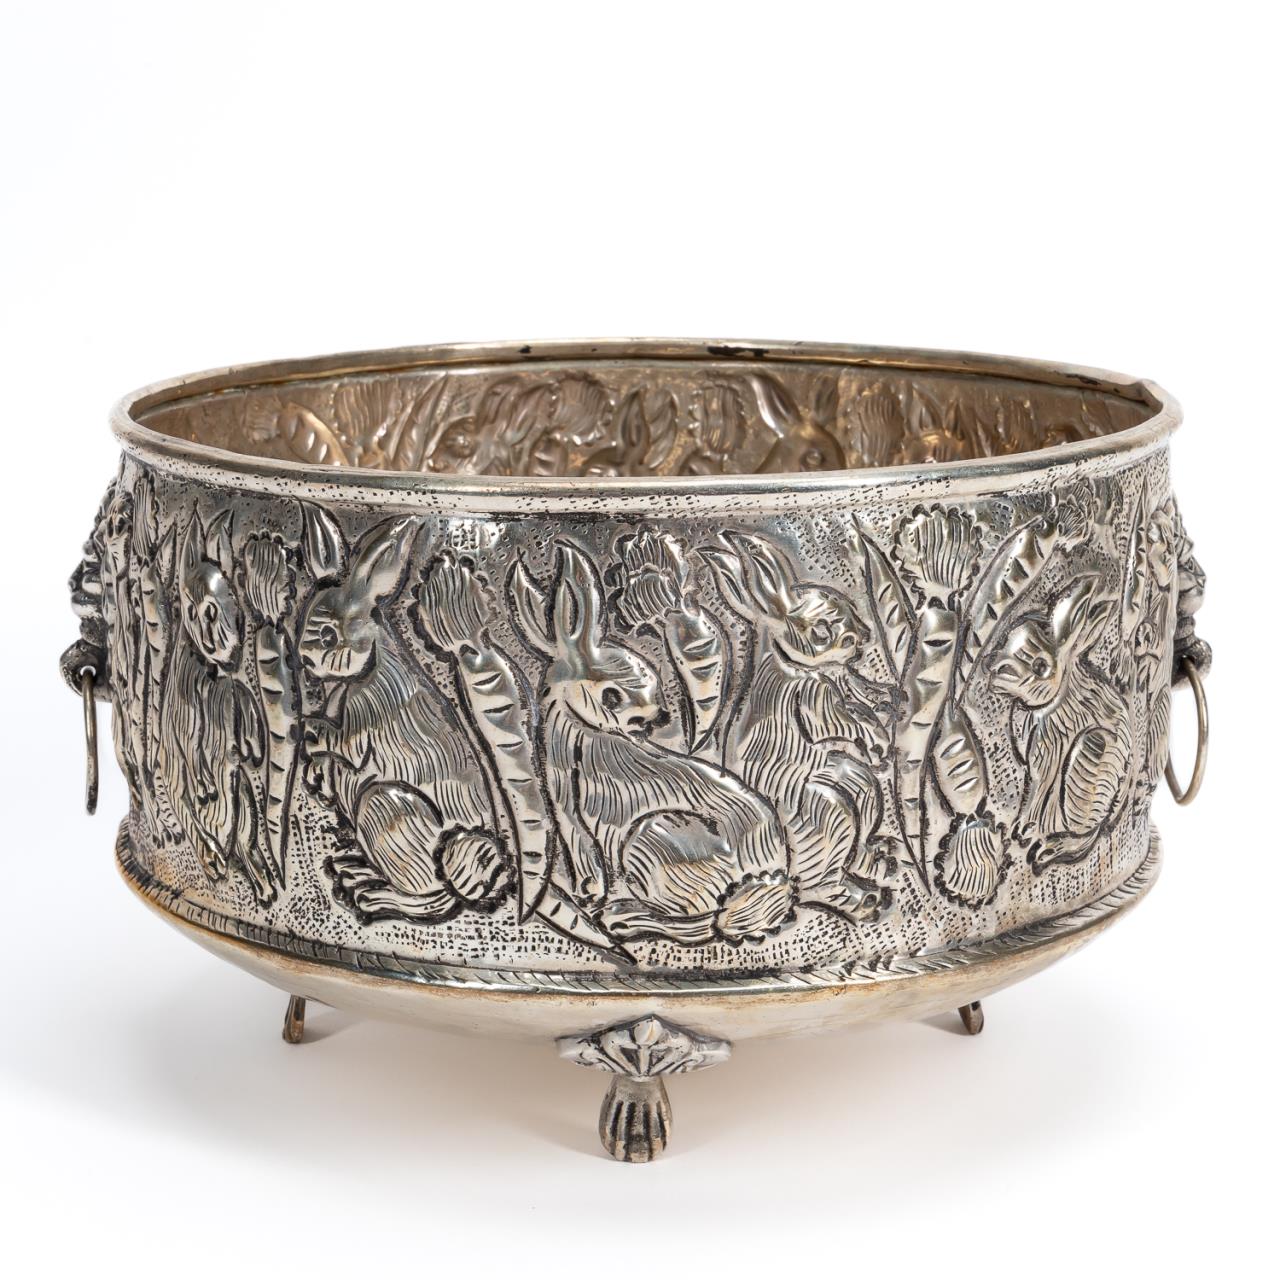 FOOTED SILVER REPOUSSE BOWL, RABBITS